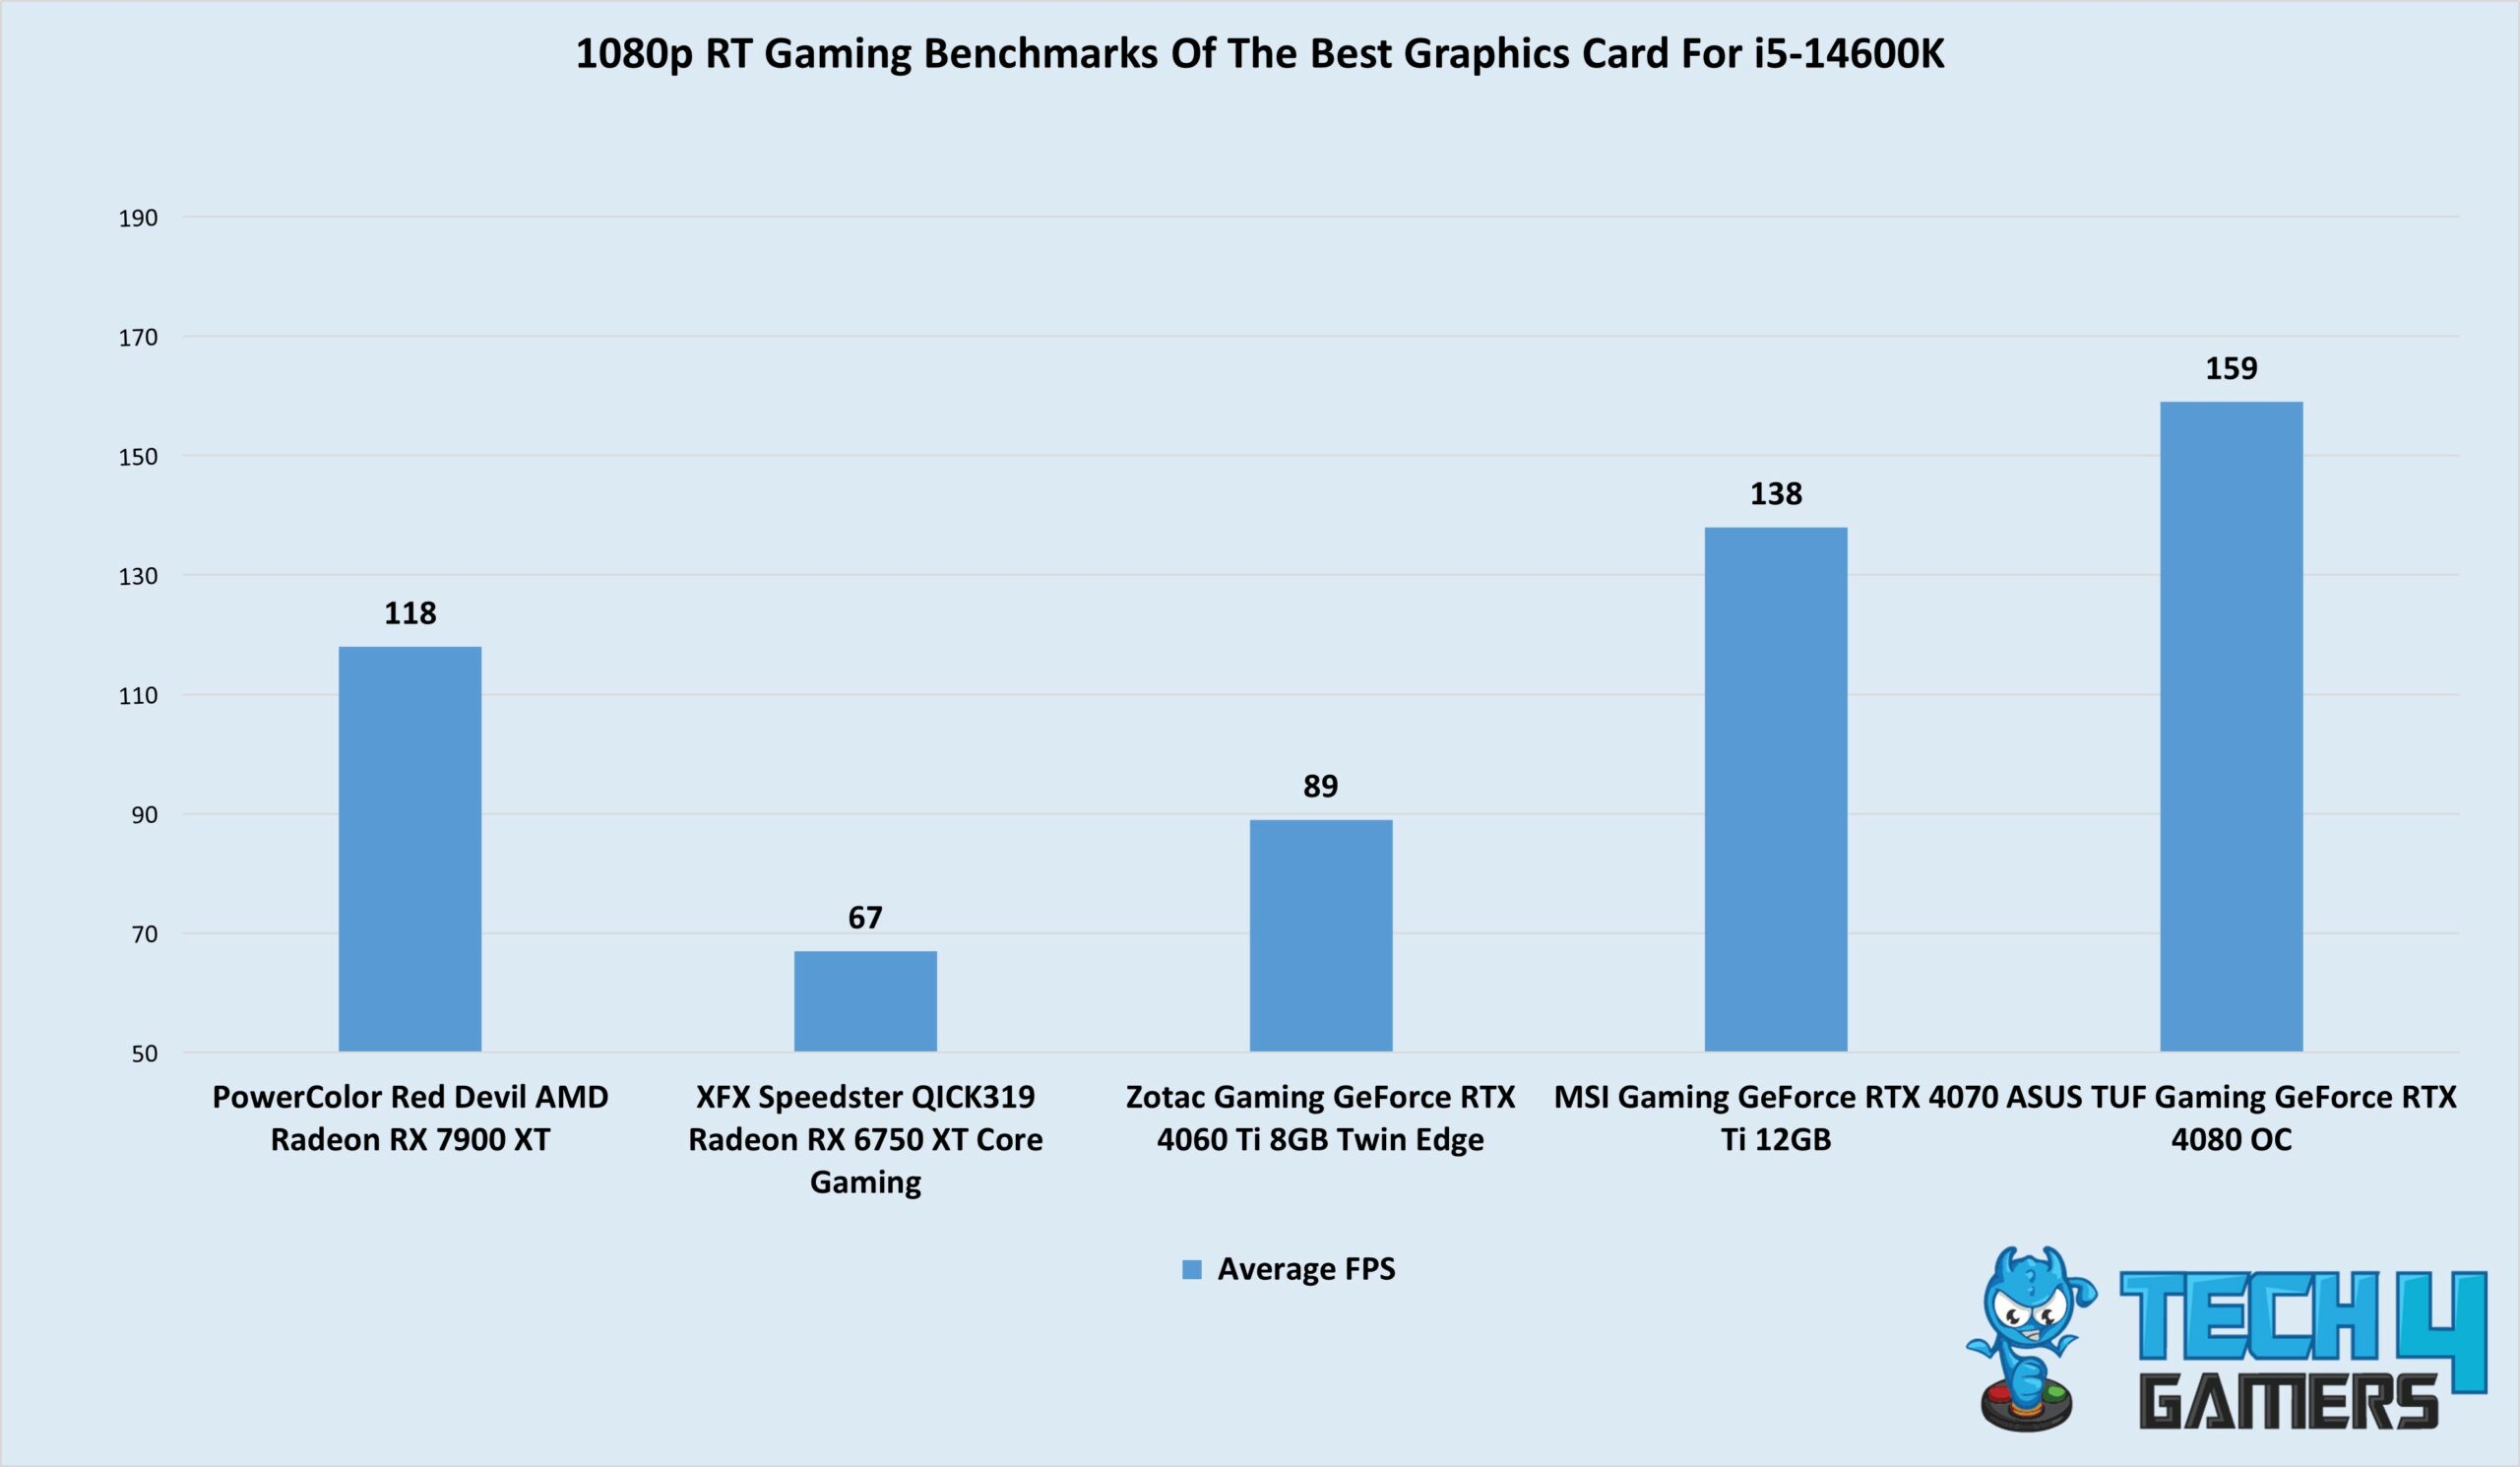 Best GPU for Core i5 14600K - for 1440p, 4K, and value picks - PC Guide